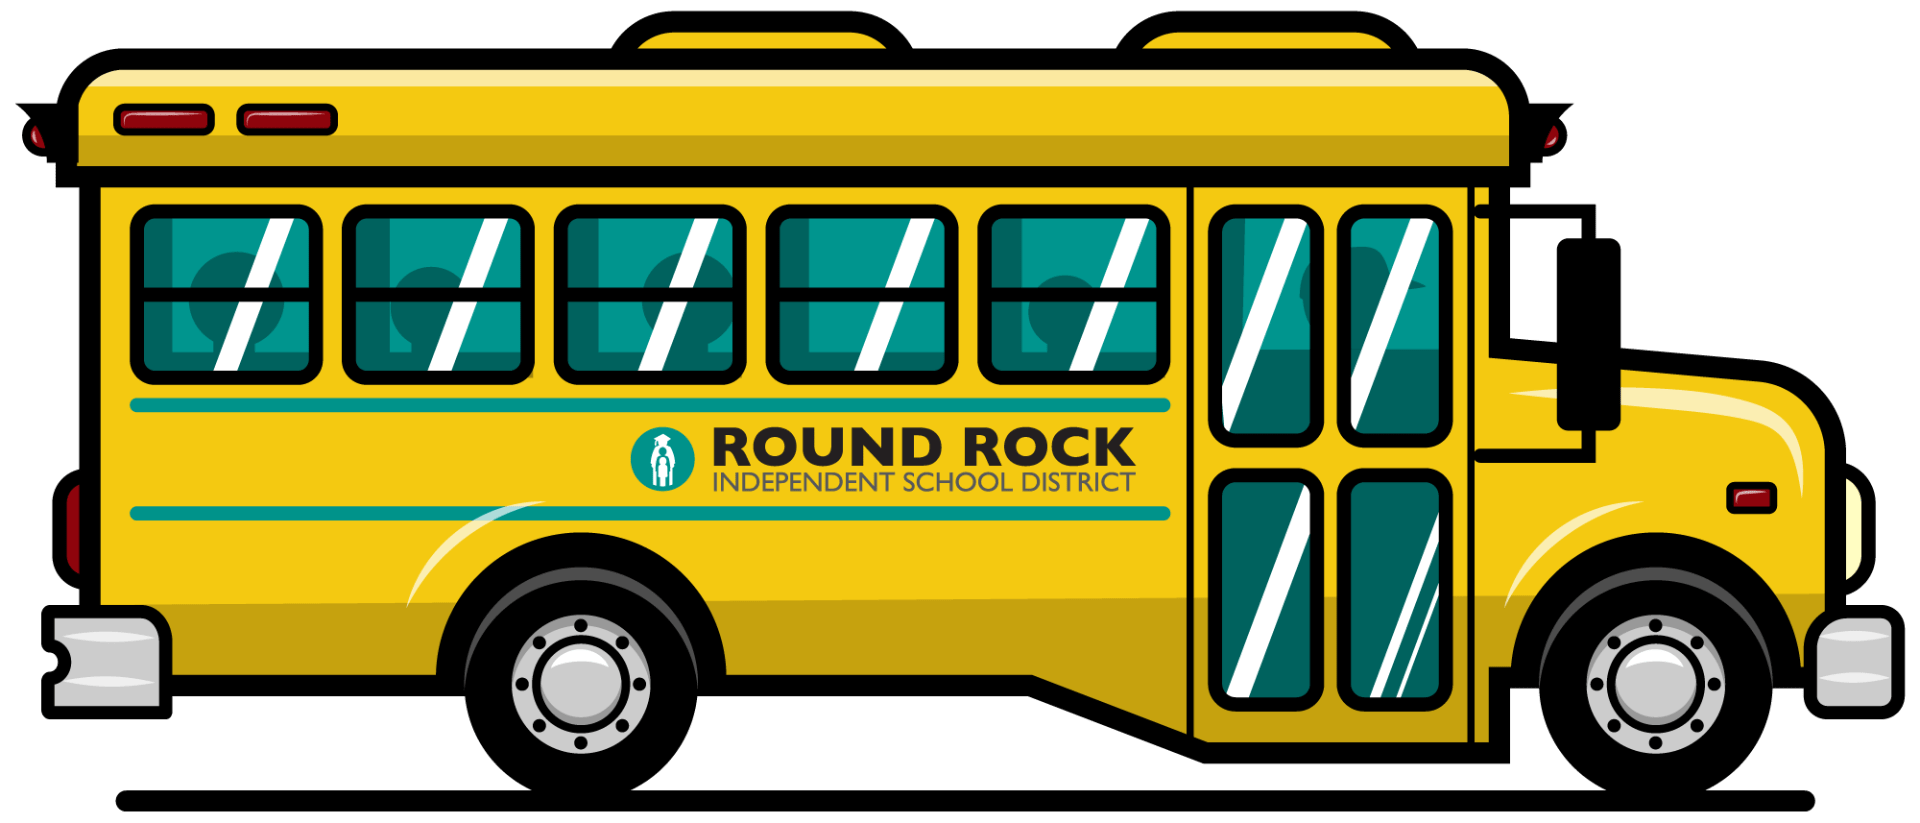 Artistic graphic of a Round Rock ISD school bus